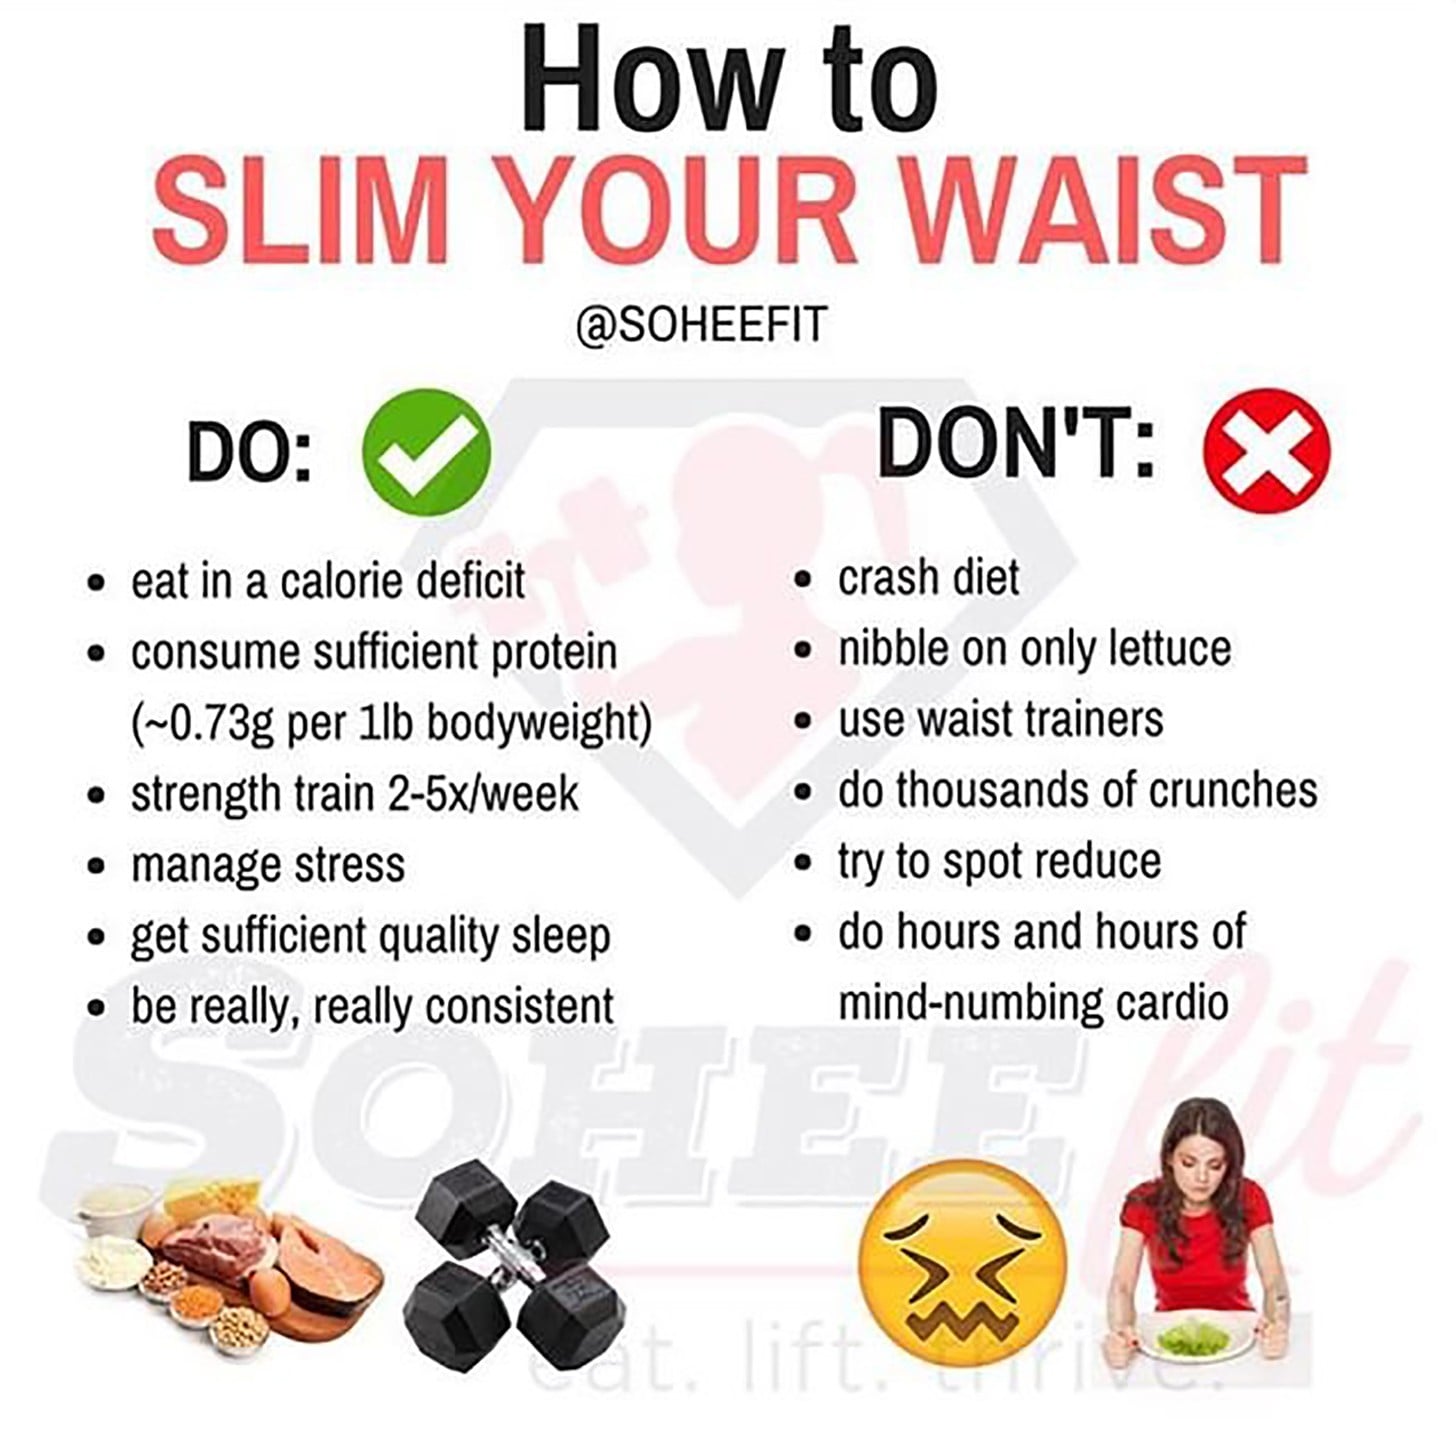 How To Get A Smaller Waist Fast